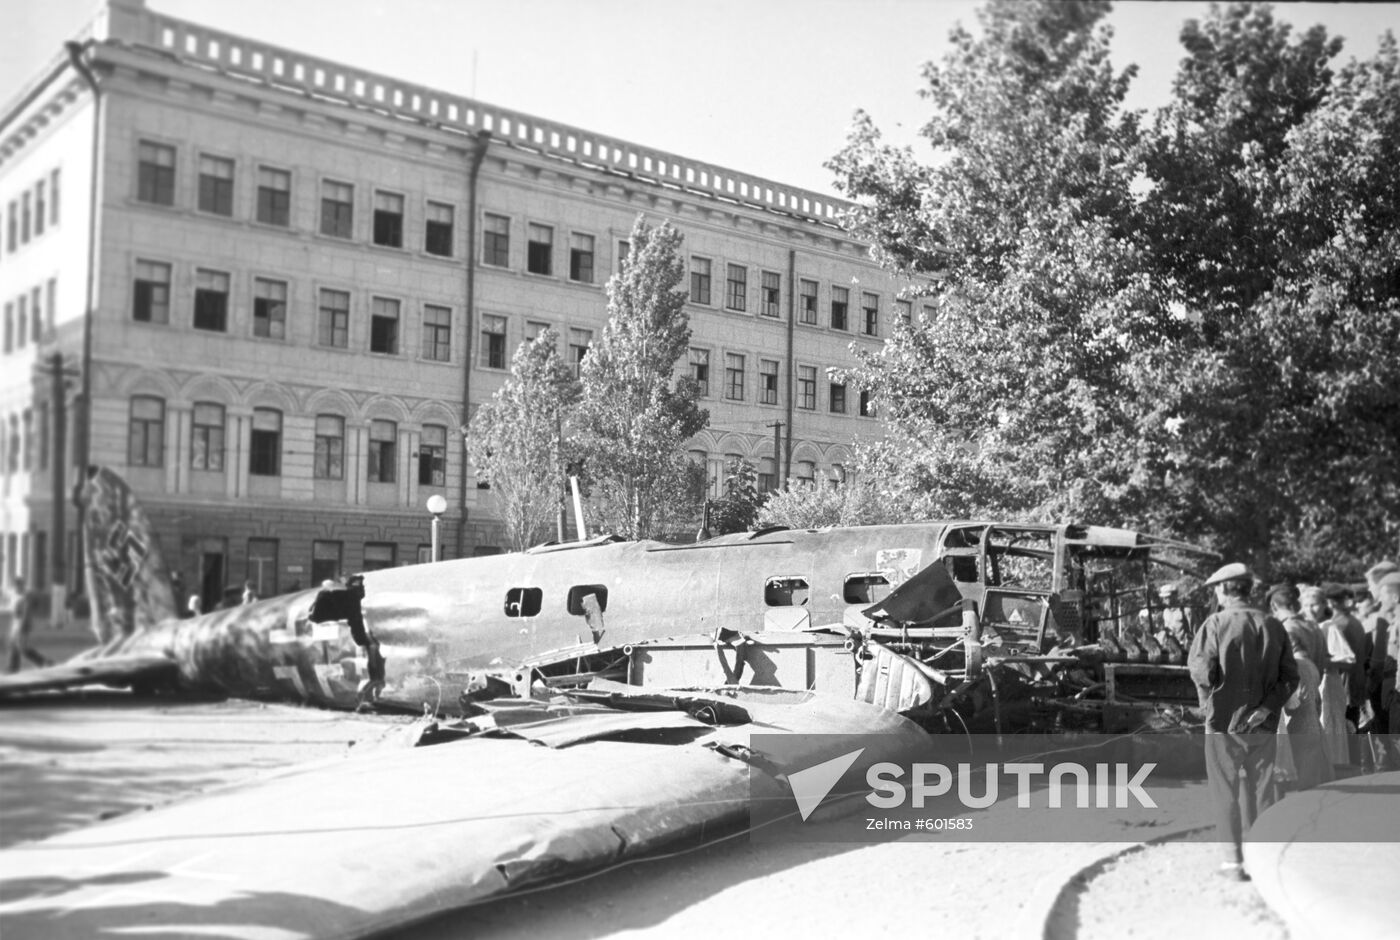 A German bomber in downtown Stalingrad